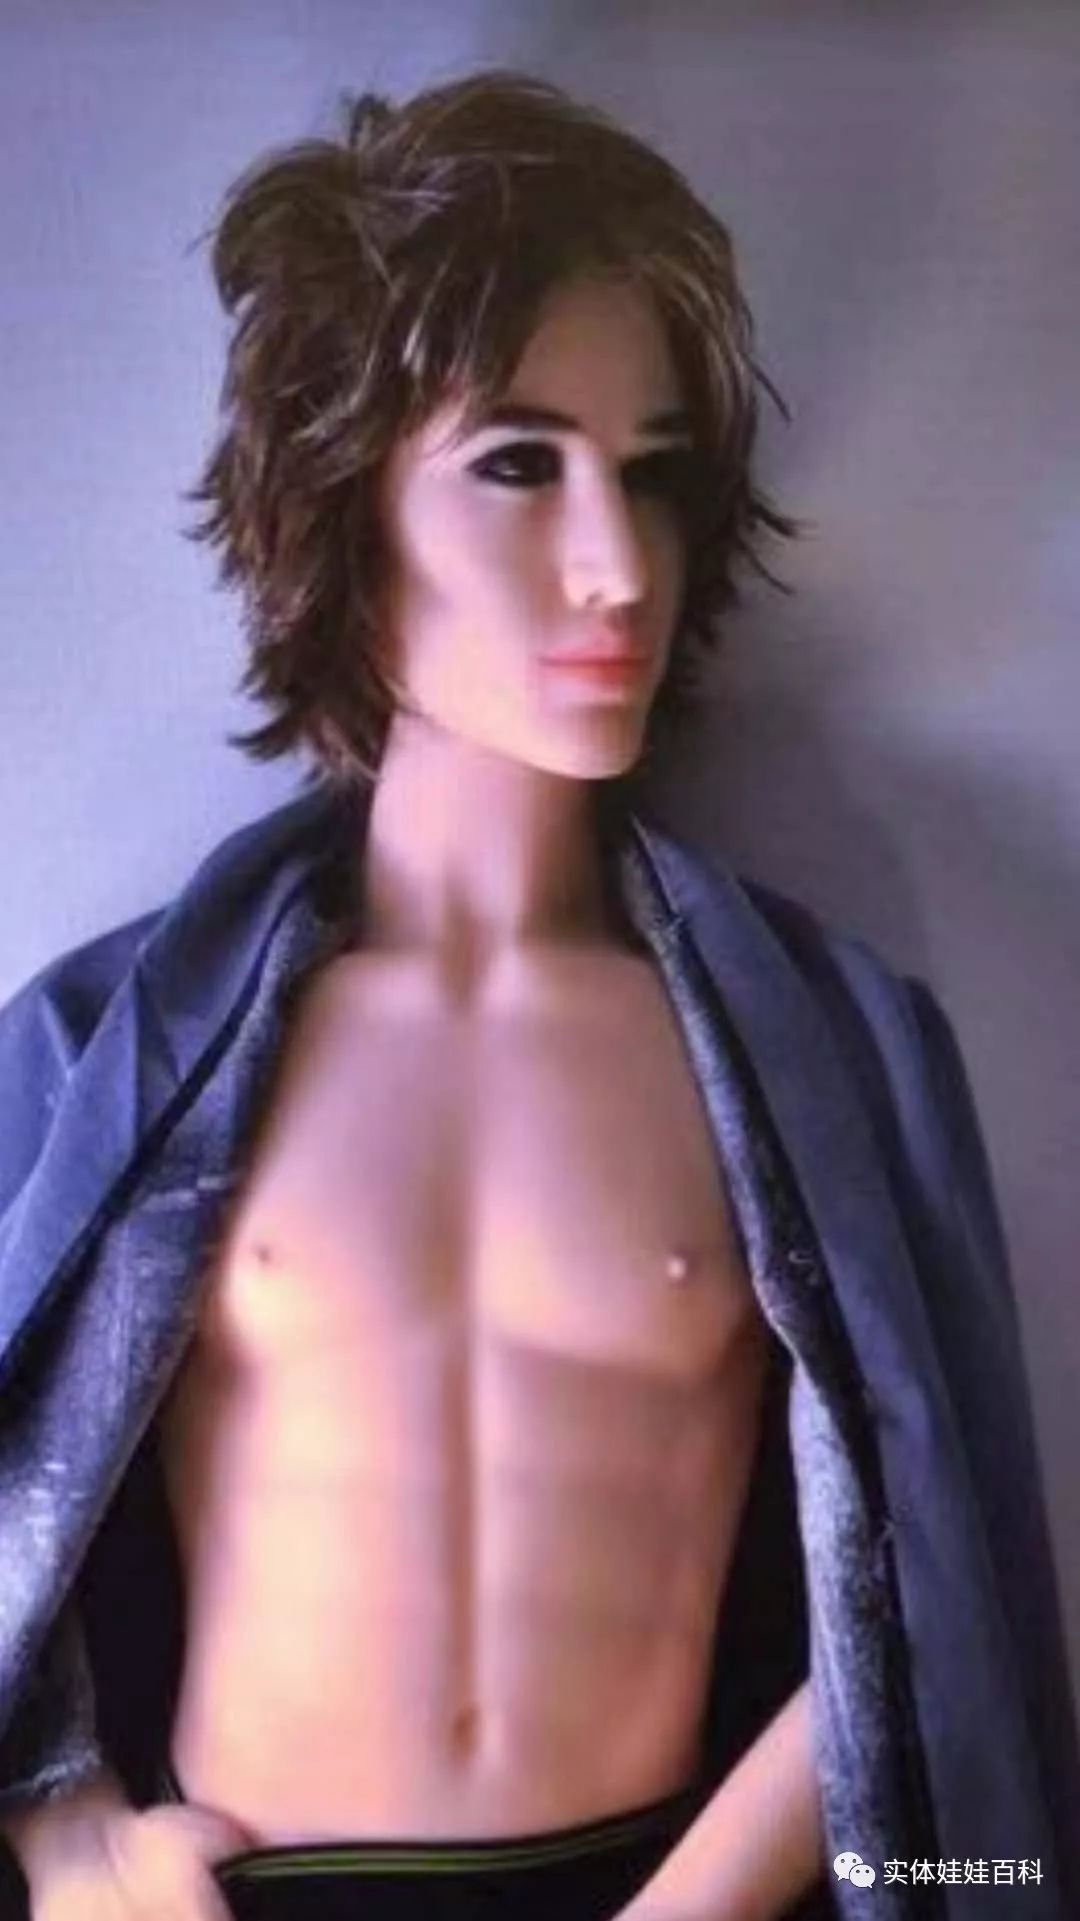 Do women need male physical dolls?